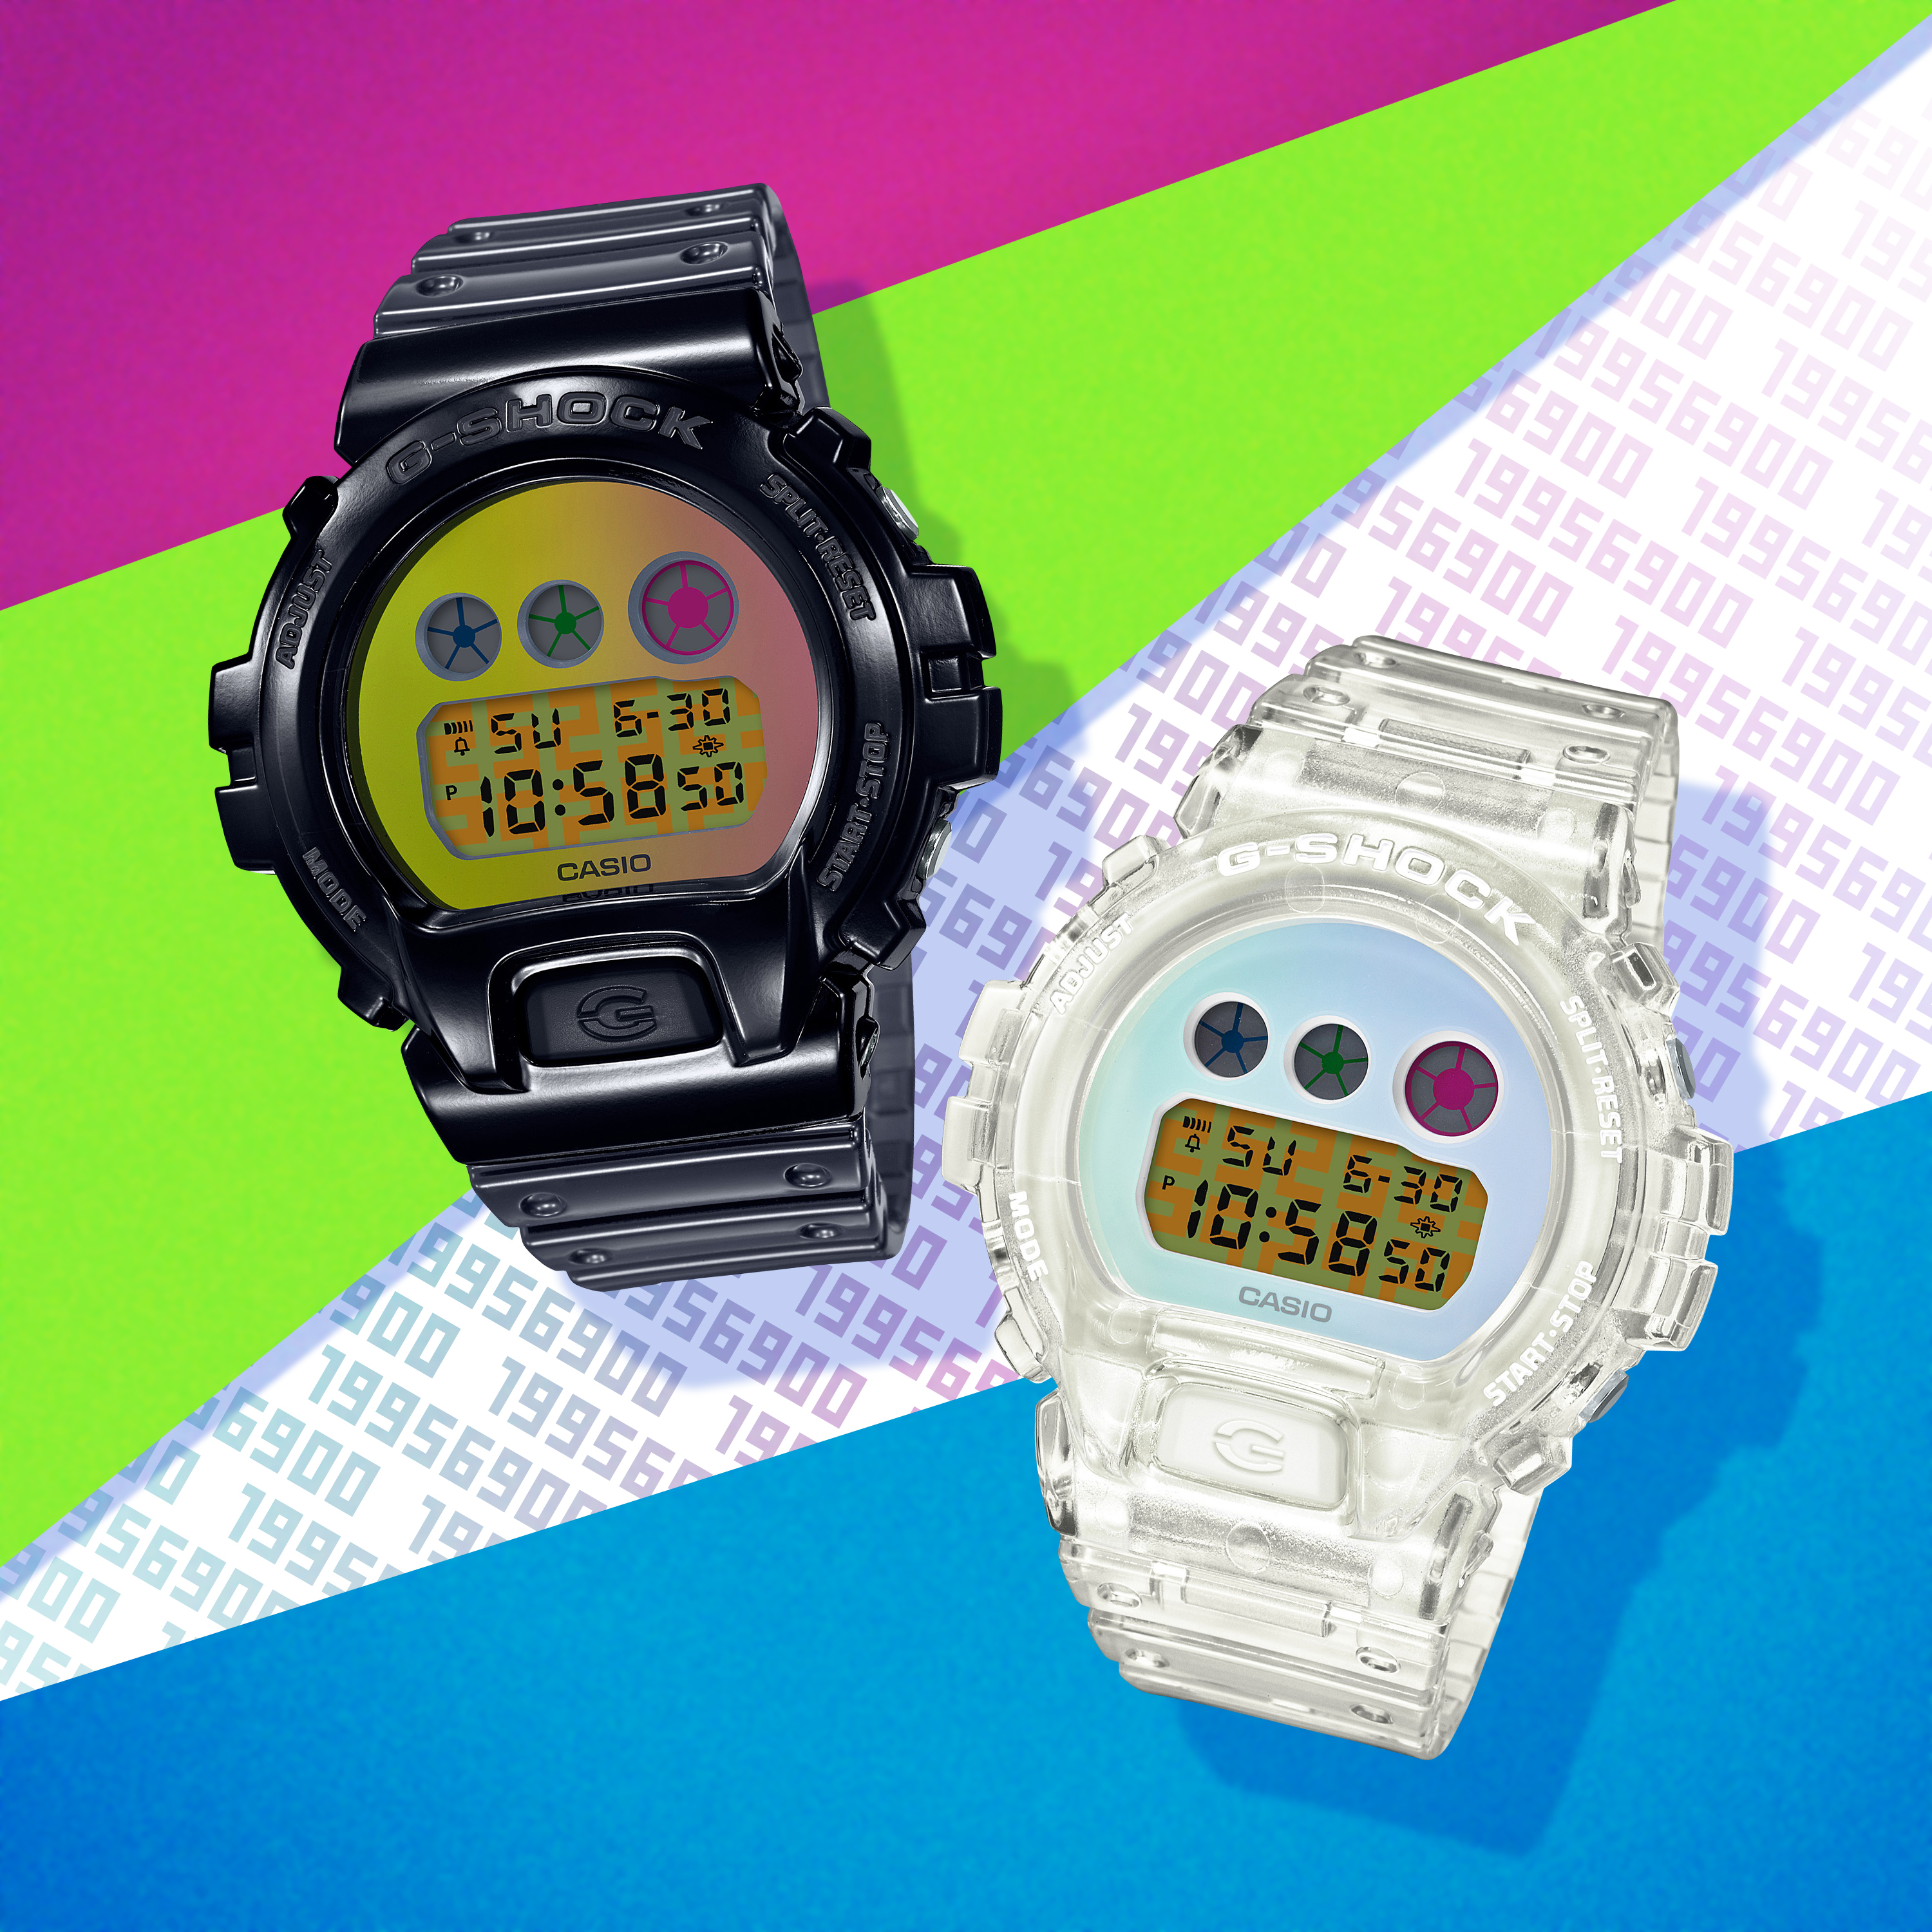 Casio G Shock Introduces Limited Edition Dw6900 Timepieces With Translucent Band And Case